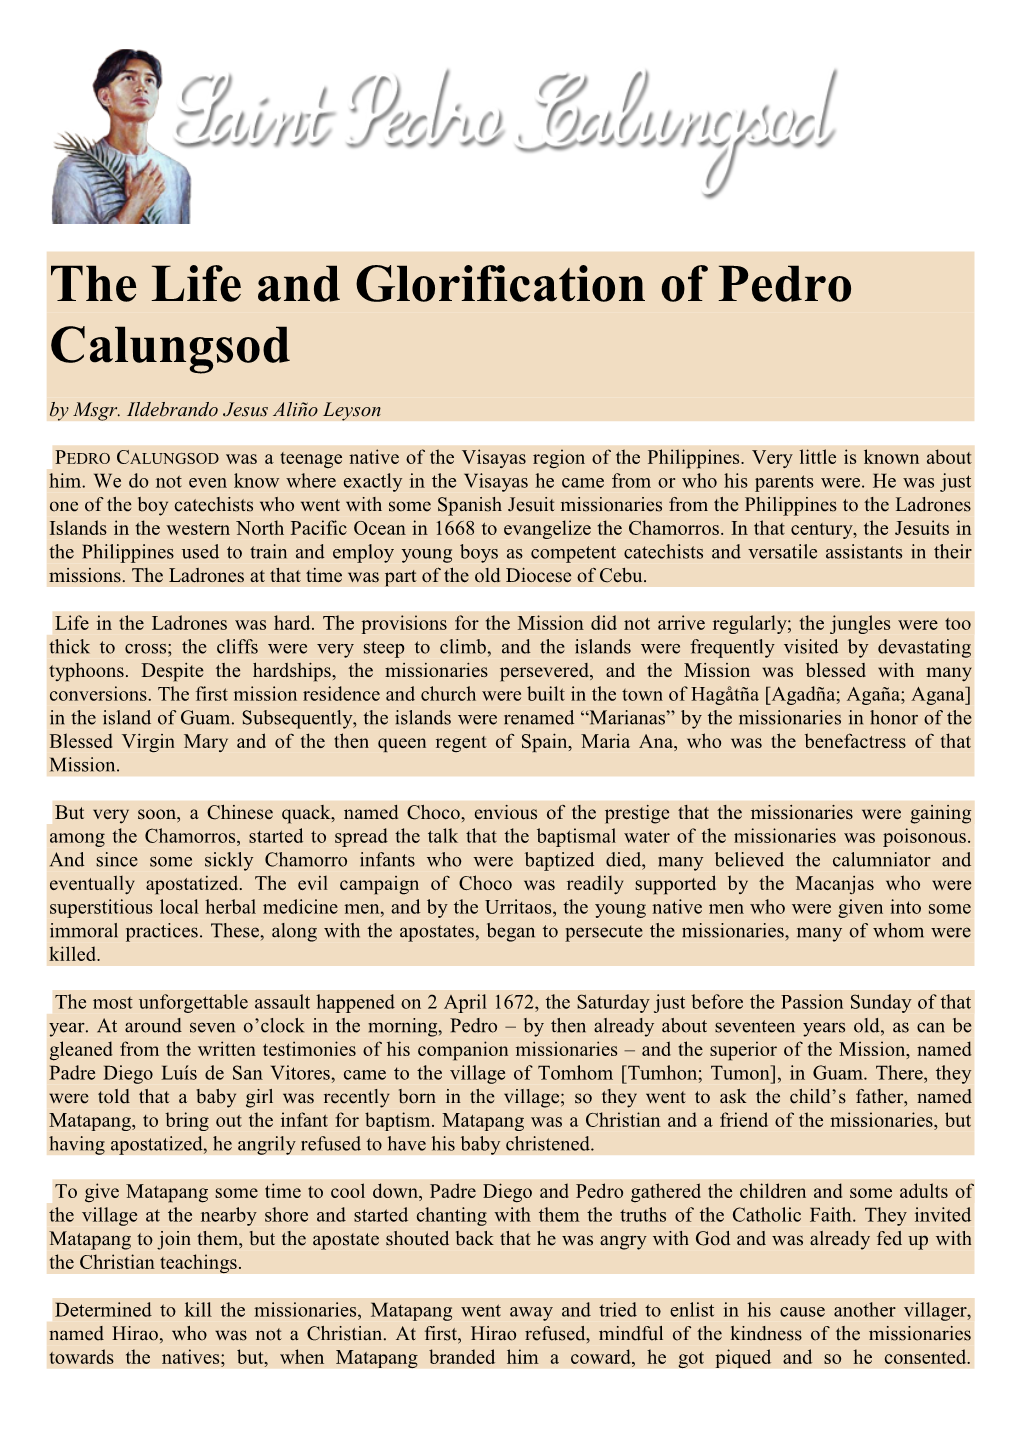 The Life and Glorification of Pedro Calungsod by Msgr